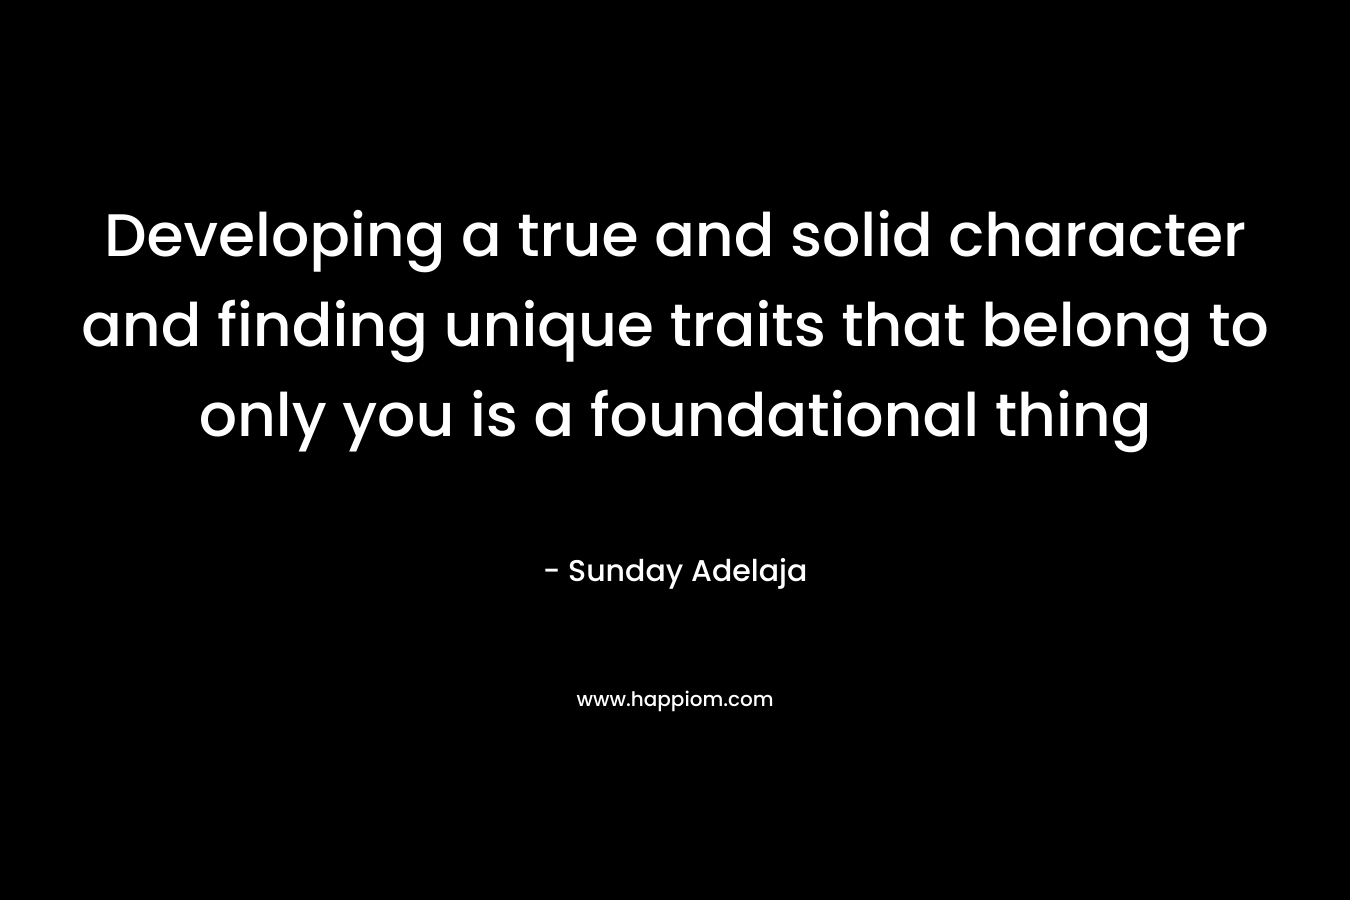 Developing a true and solid character and finding unique traits that belong to only you is a foundational thing